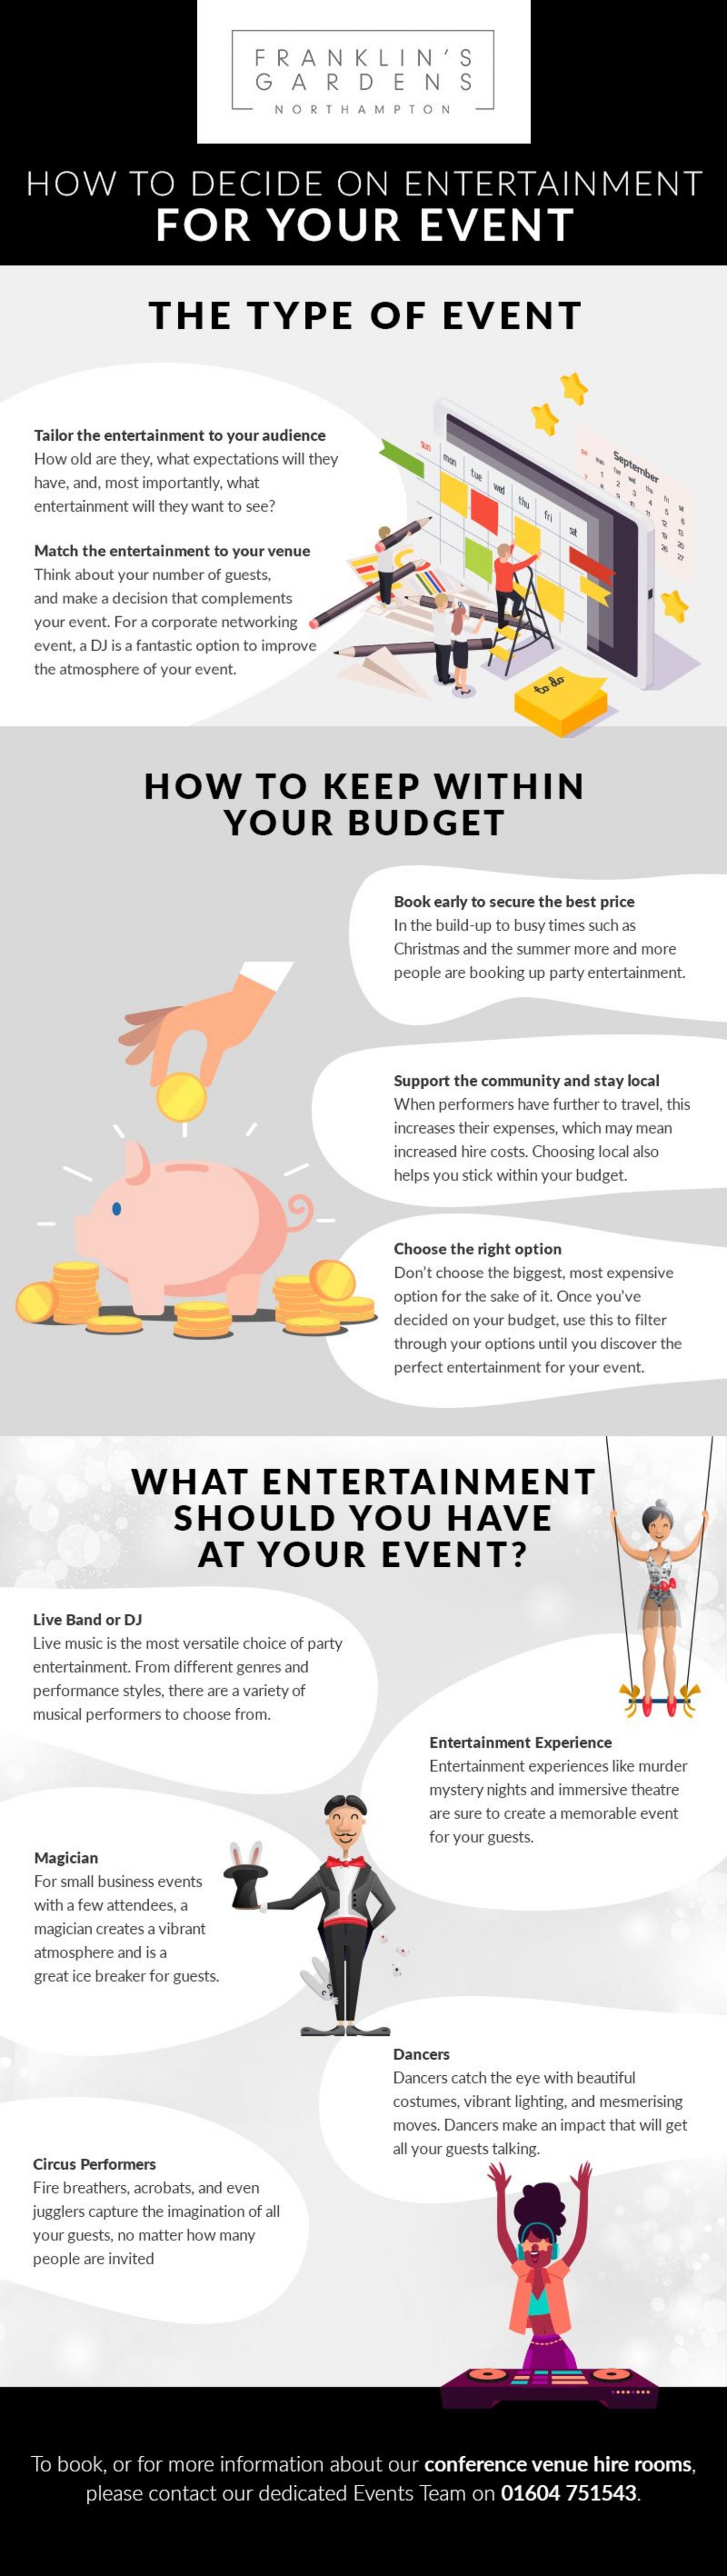 How to Decide on Entertainment For You Event?